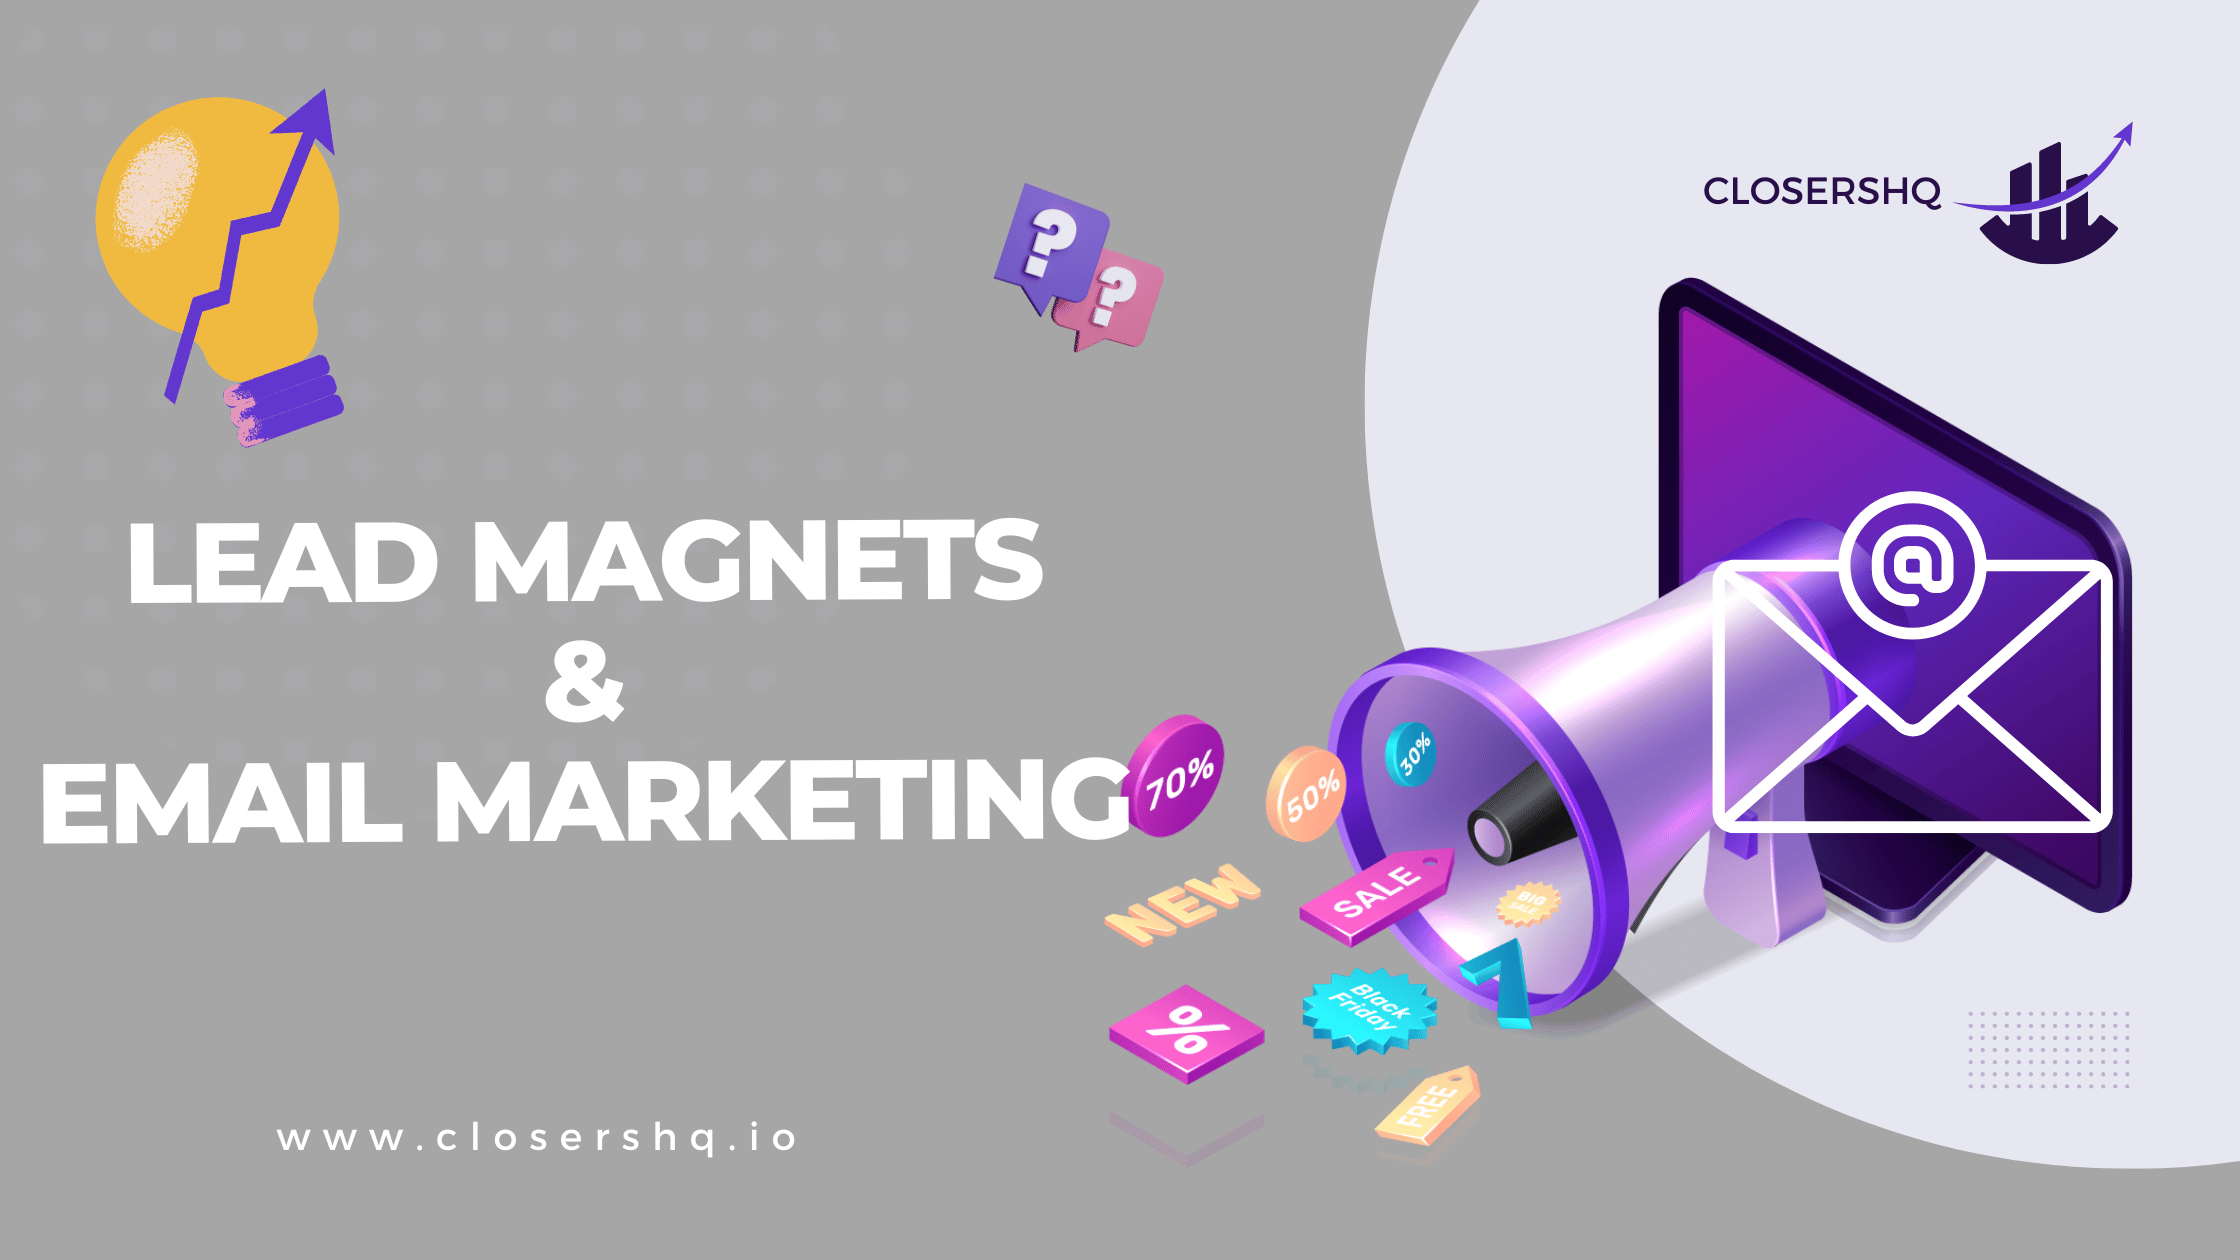 Using Lead Magnets in Association with Email Marketing to Generate Leads